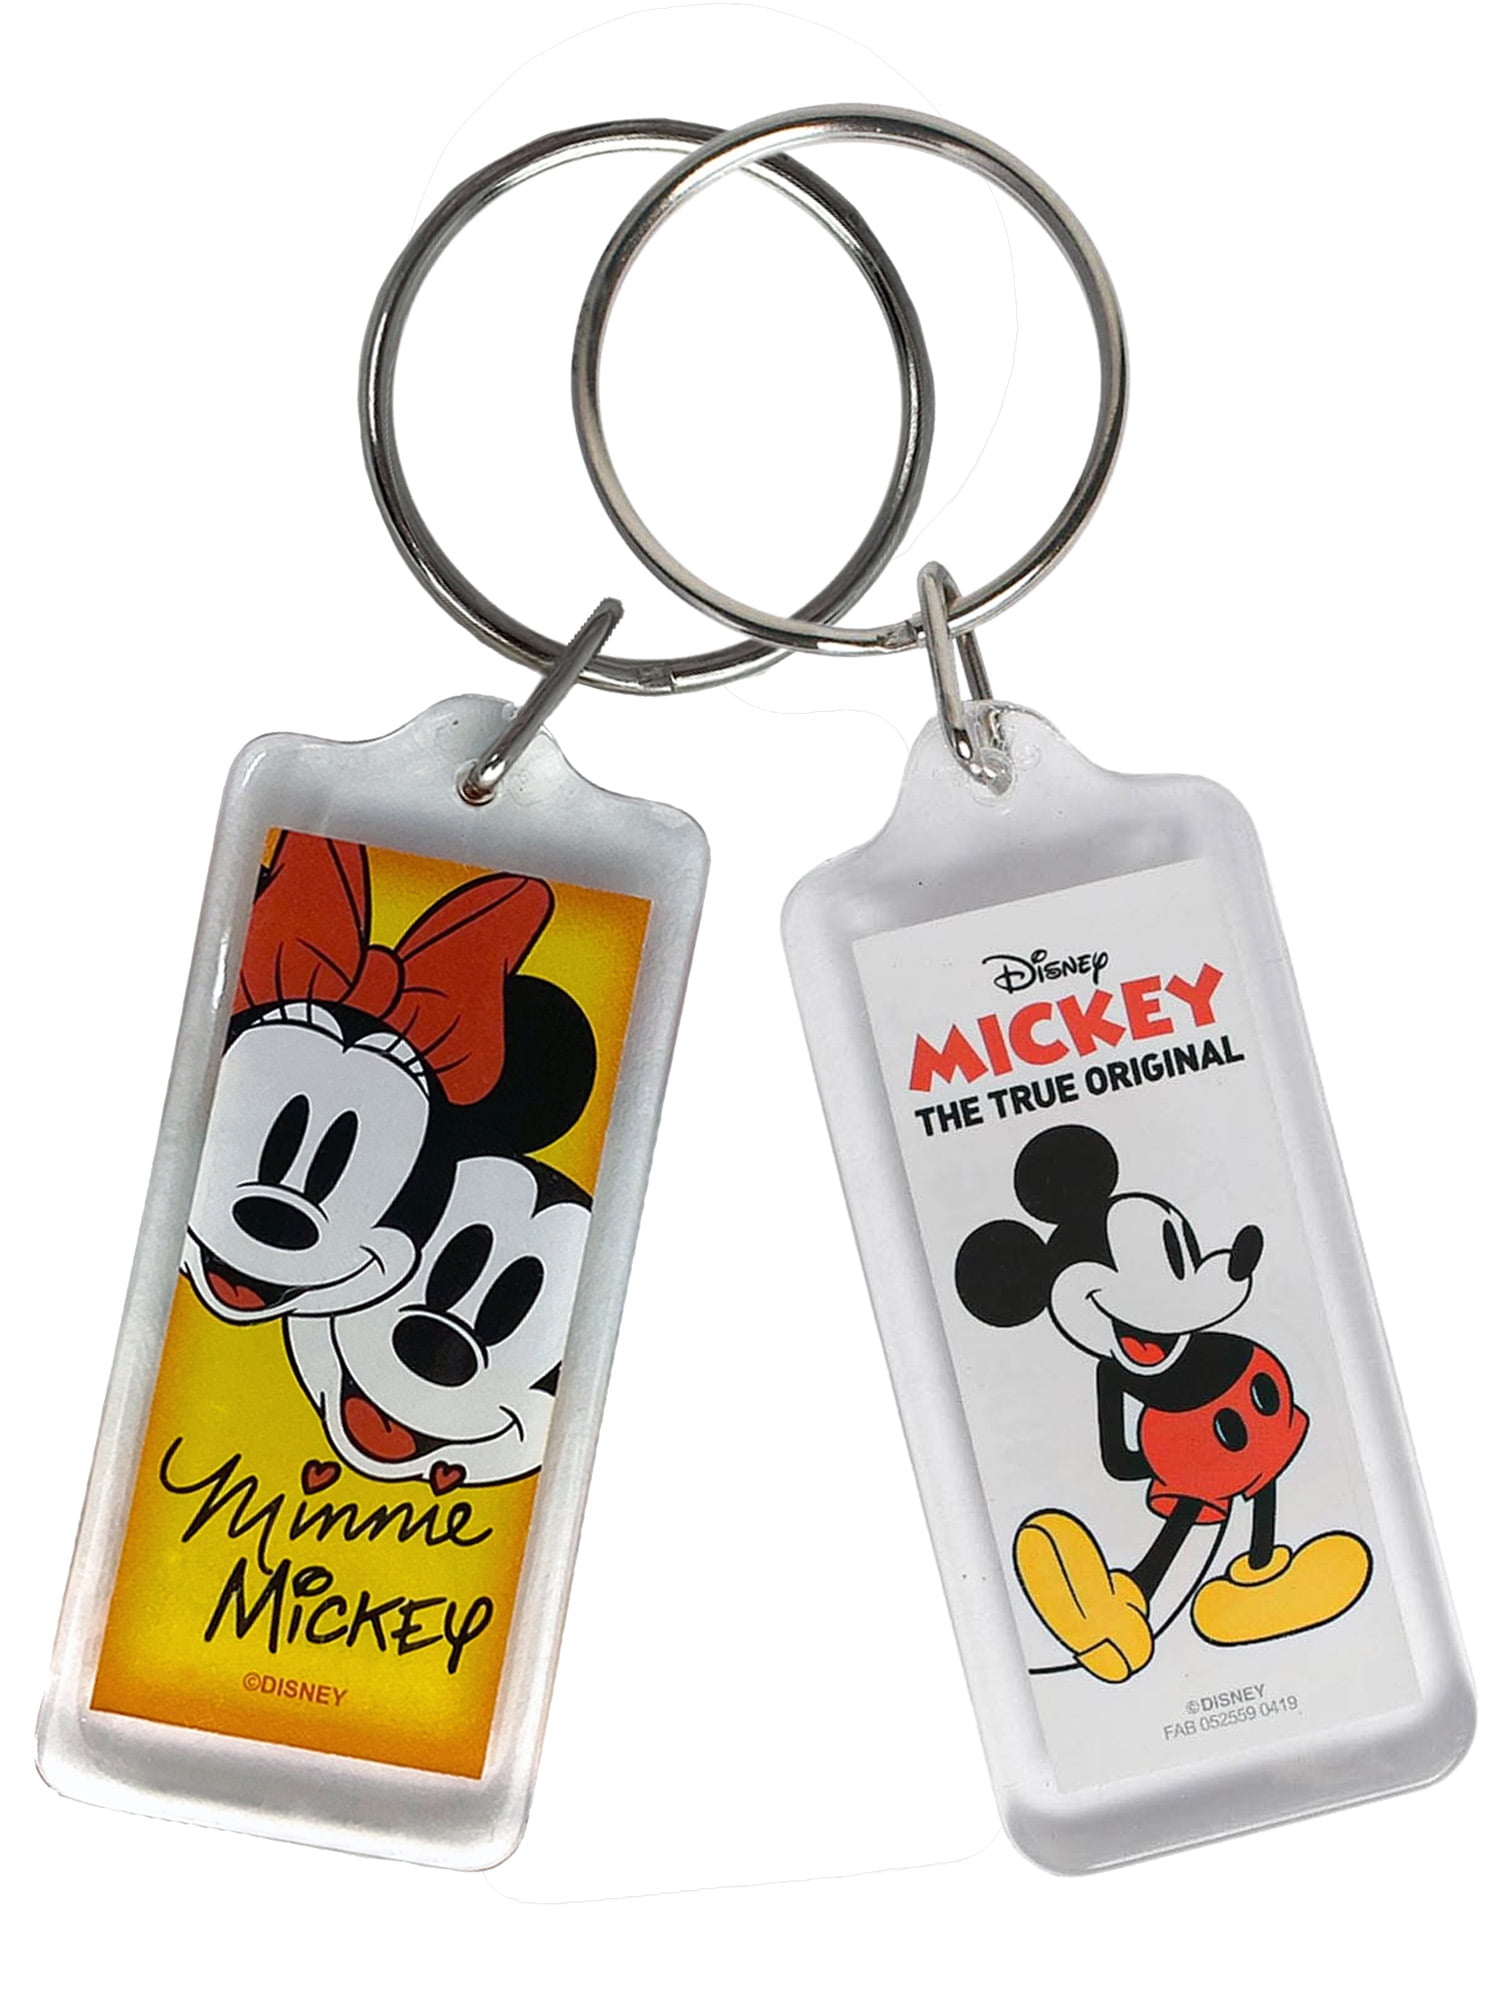 Homemade keychain with a mickey key approved